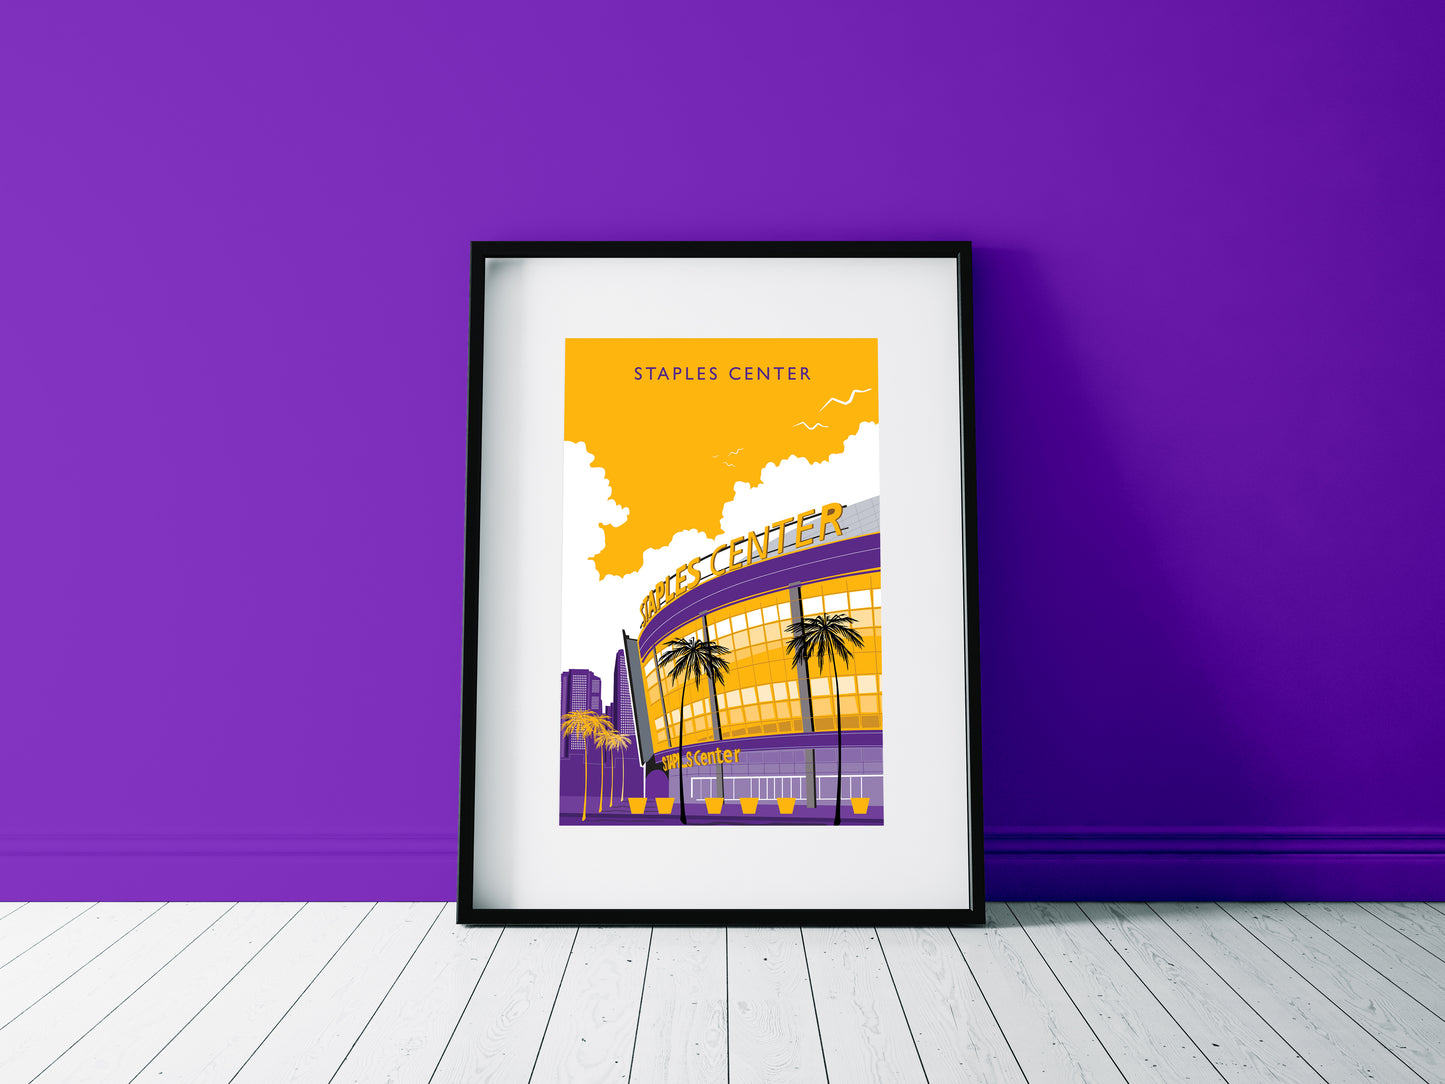 The Staples Center dbl.drbbl A3 Graphic Print